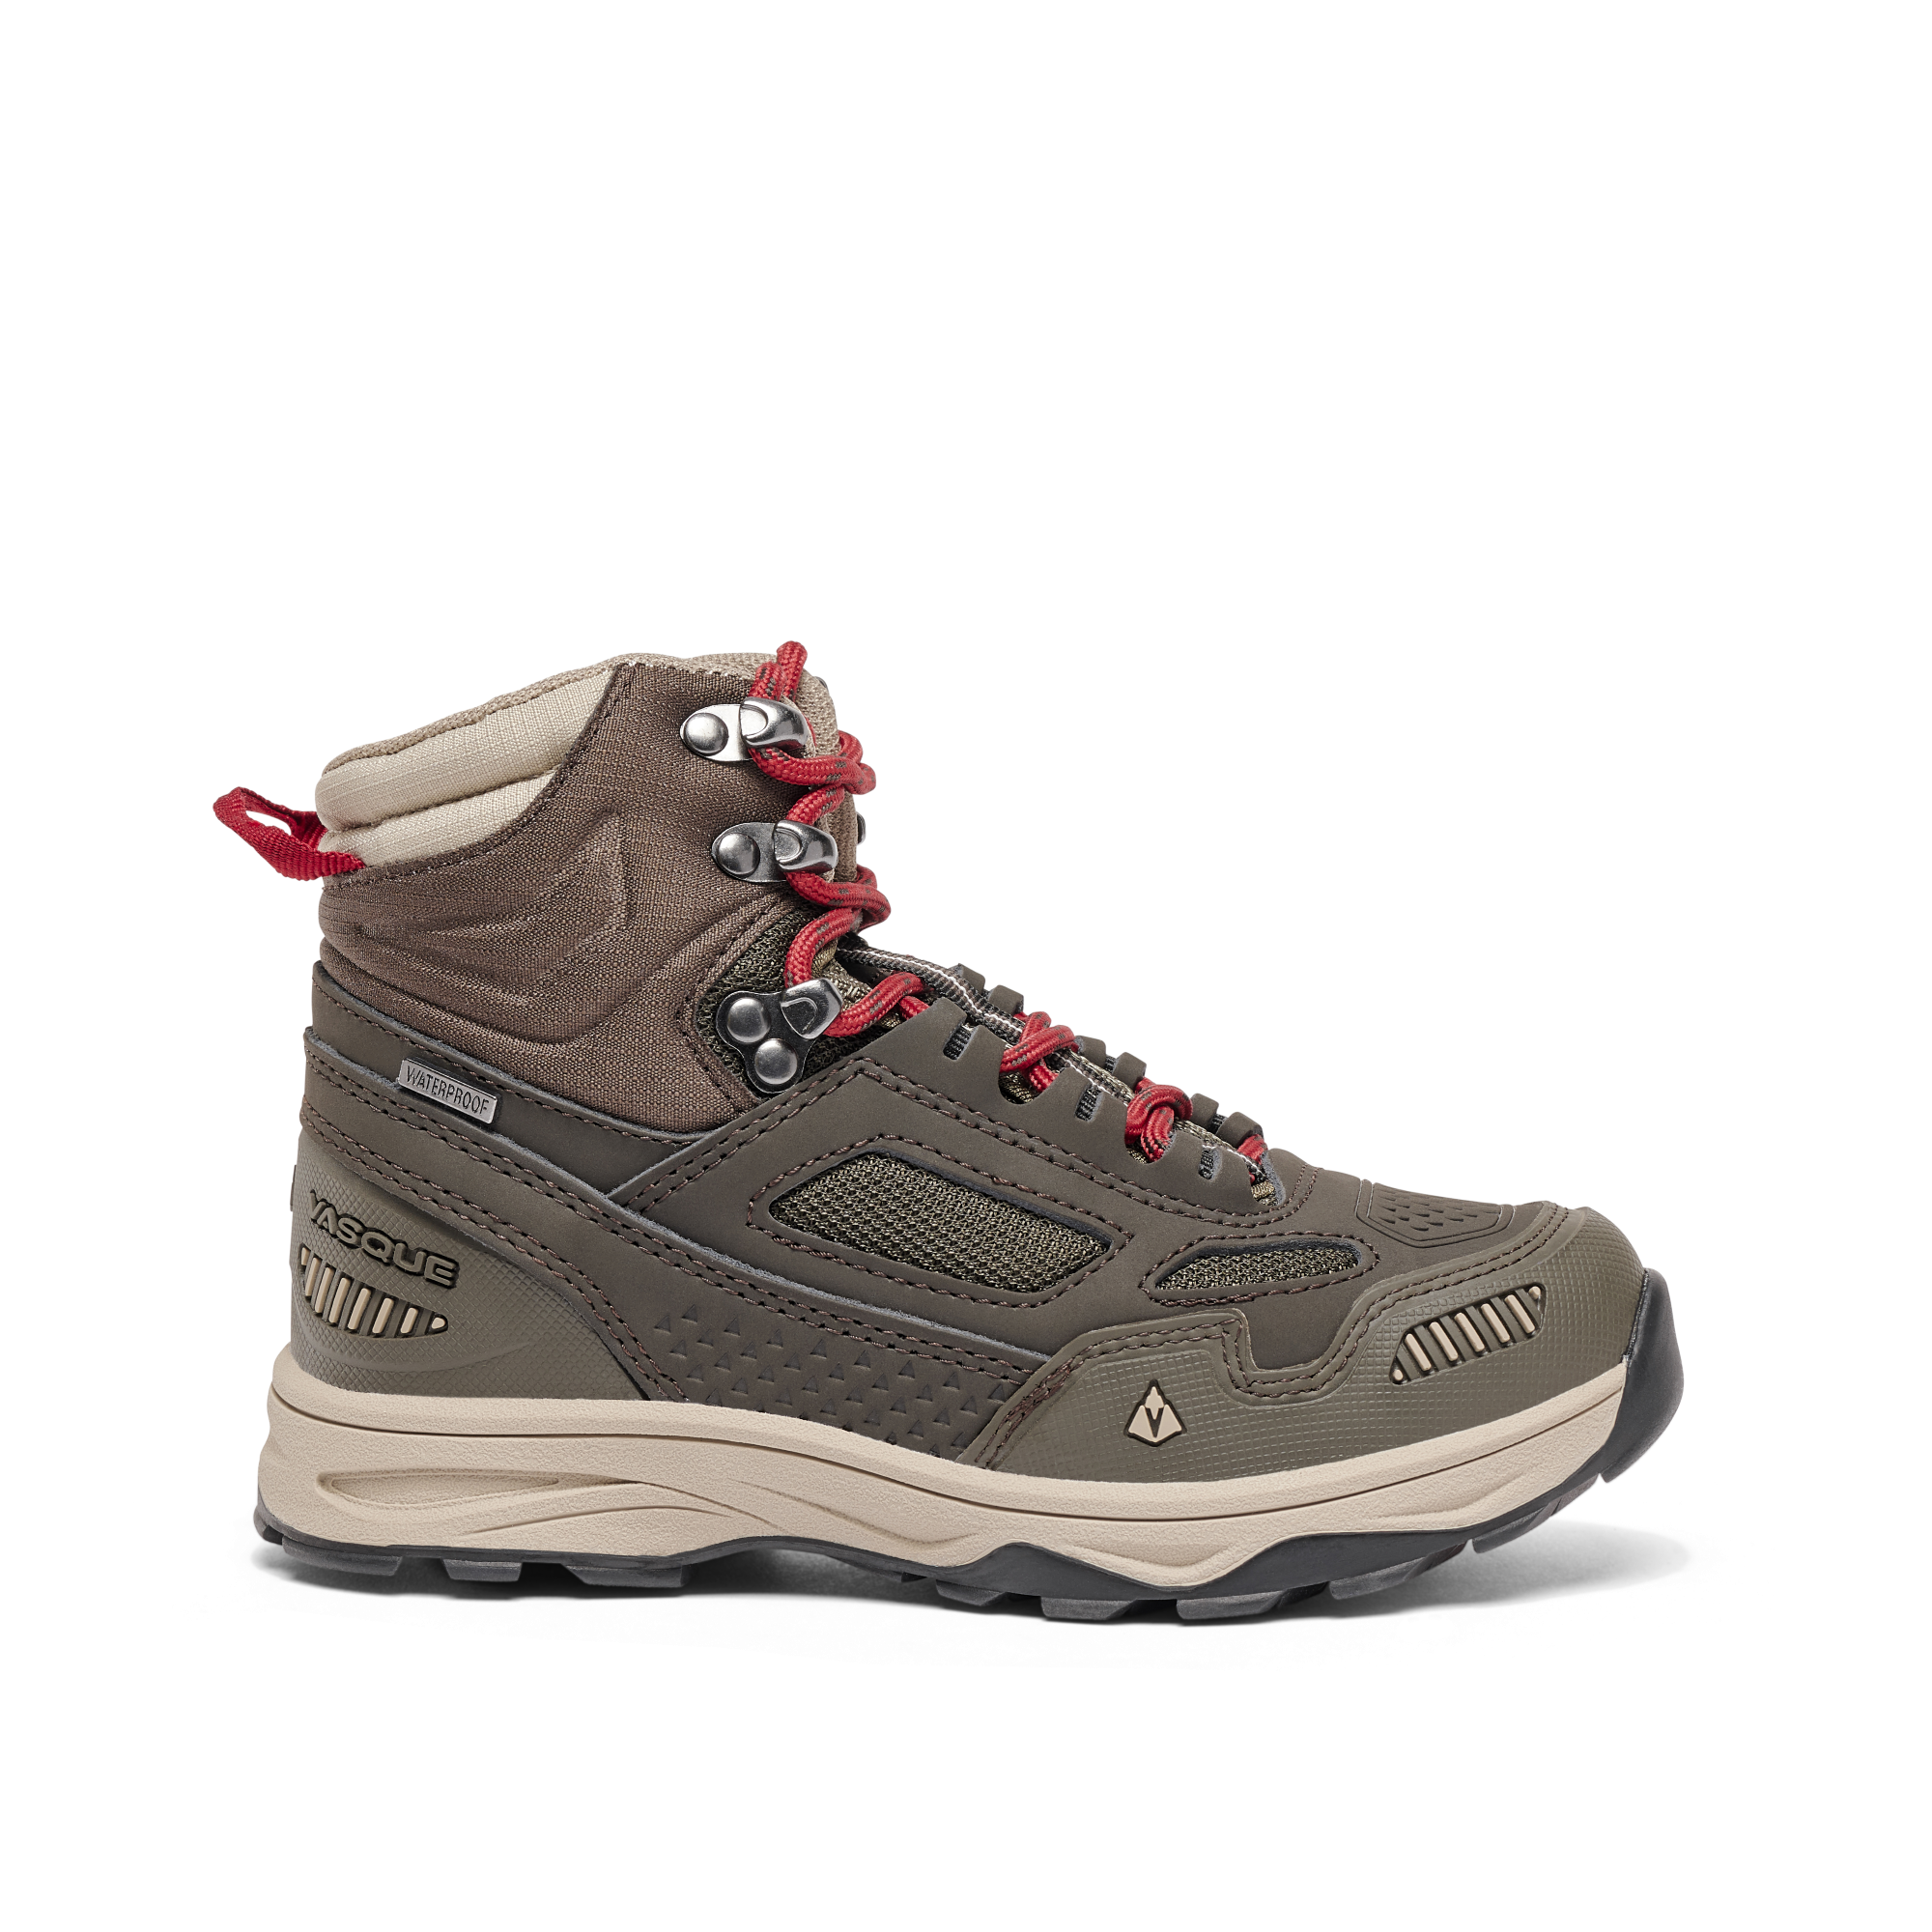 Vasque Breeze AT UltraDry Waterproof Hiking Boots for Kids - Olive - 10 Kids